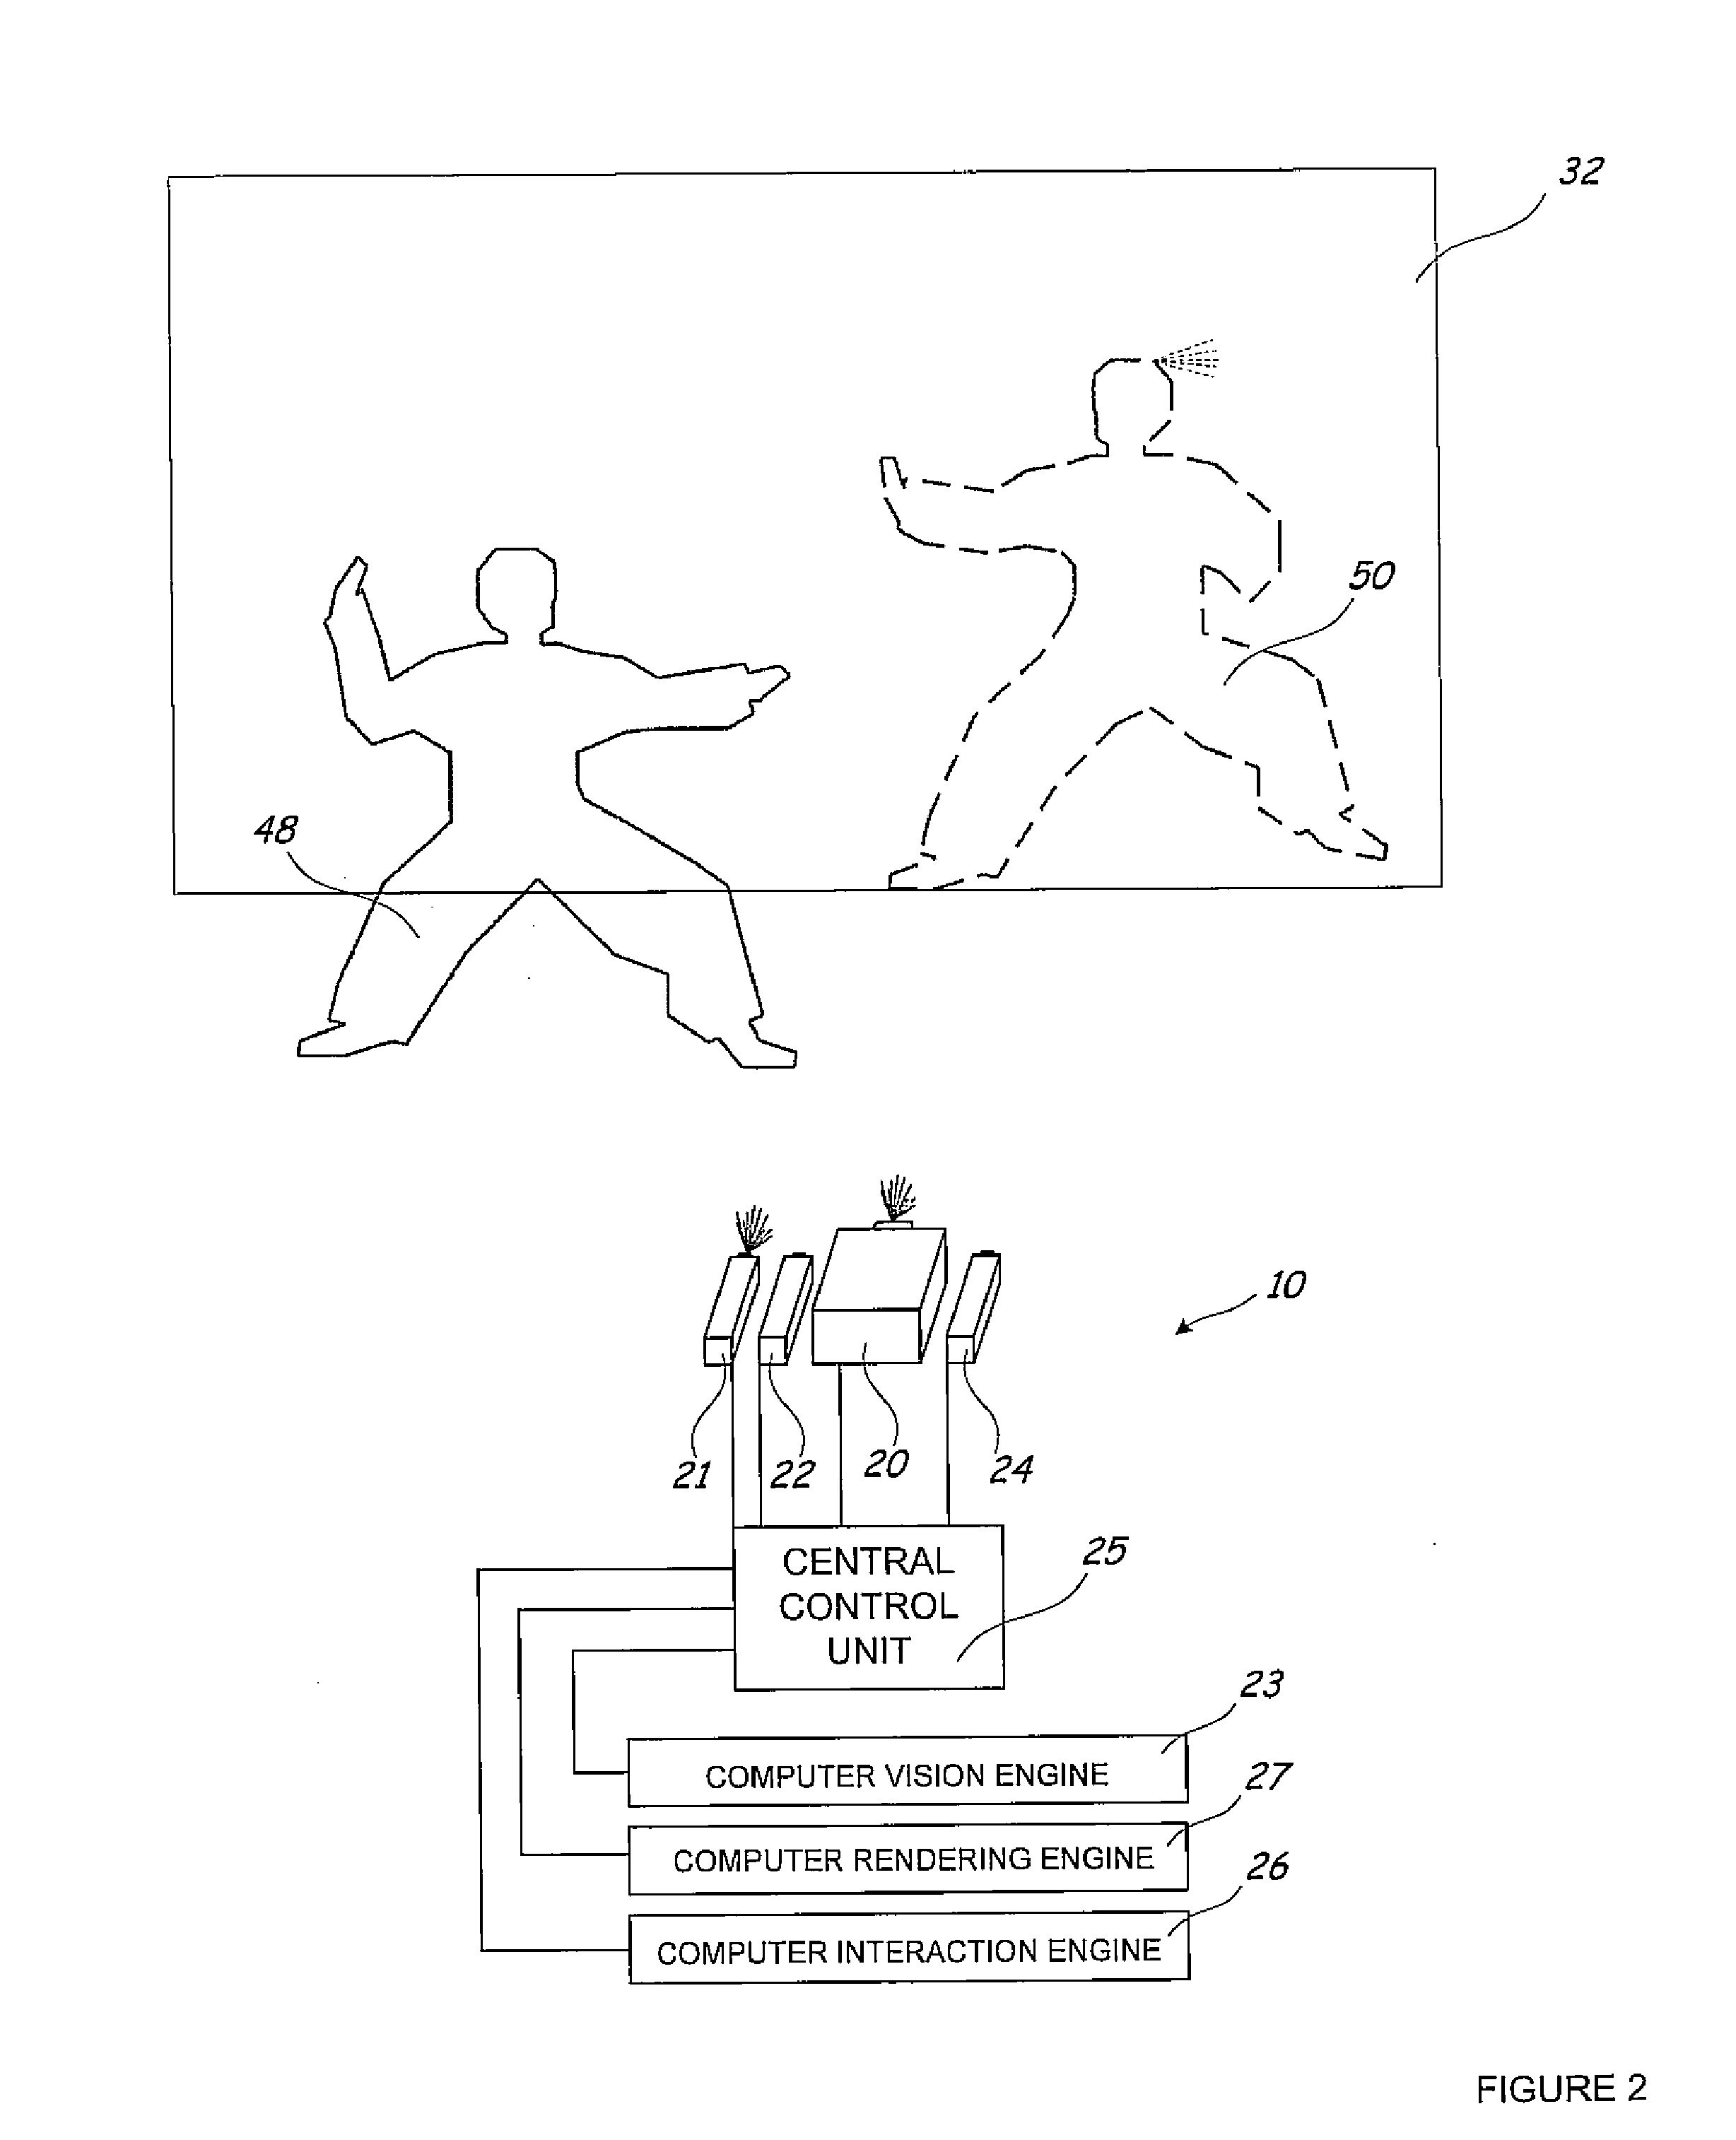 System and method for enabling meaningful interaction with video based characters and objects